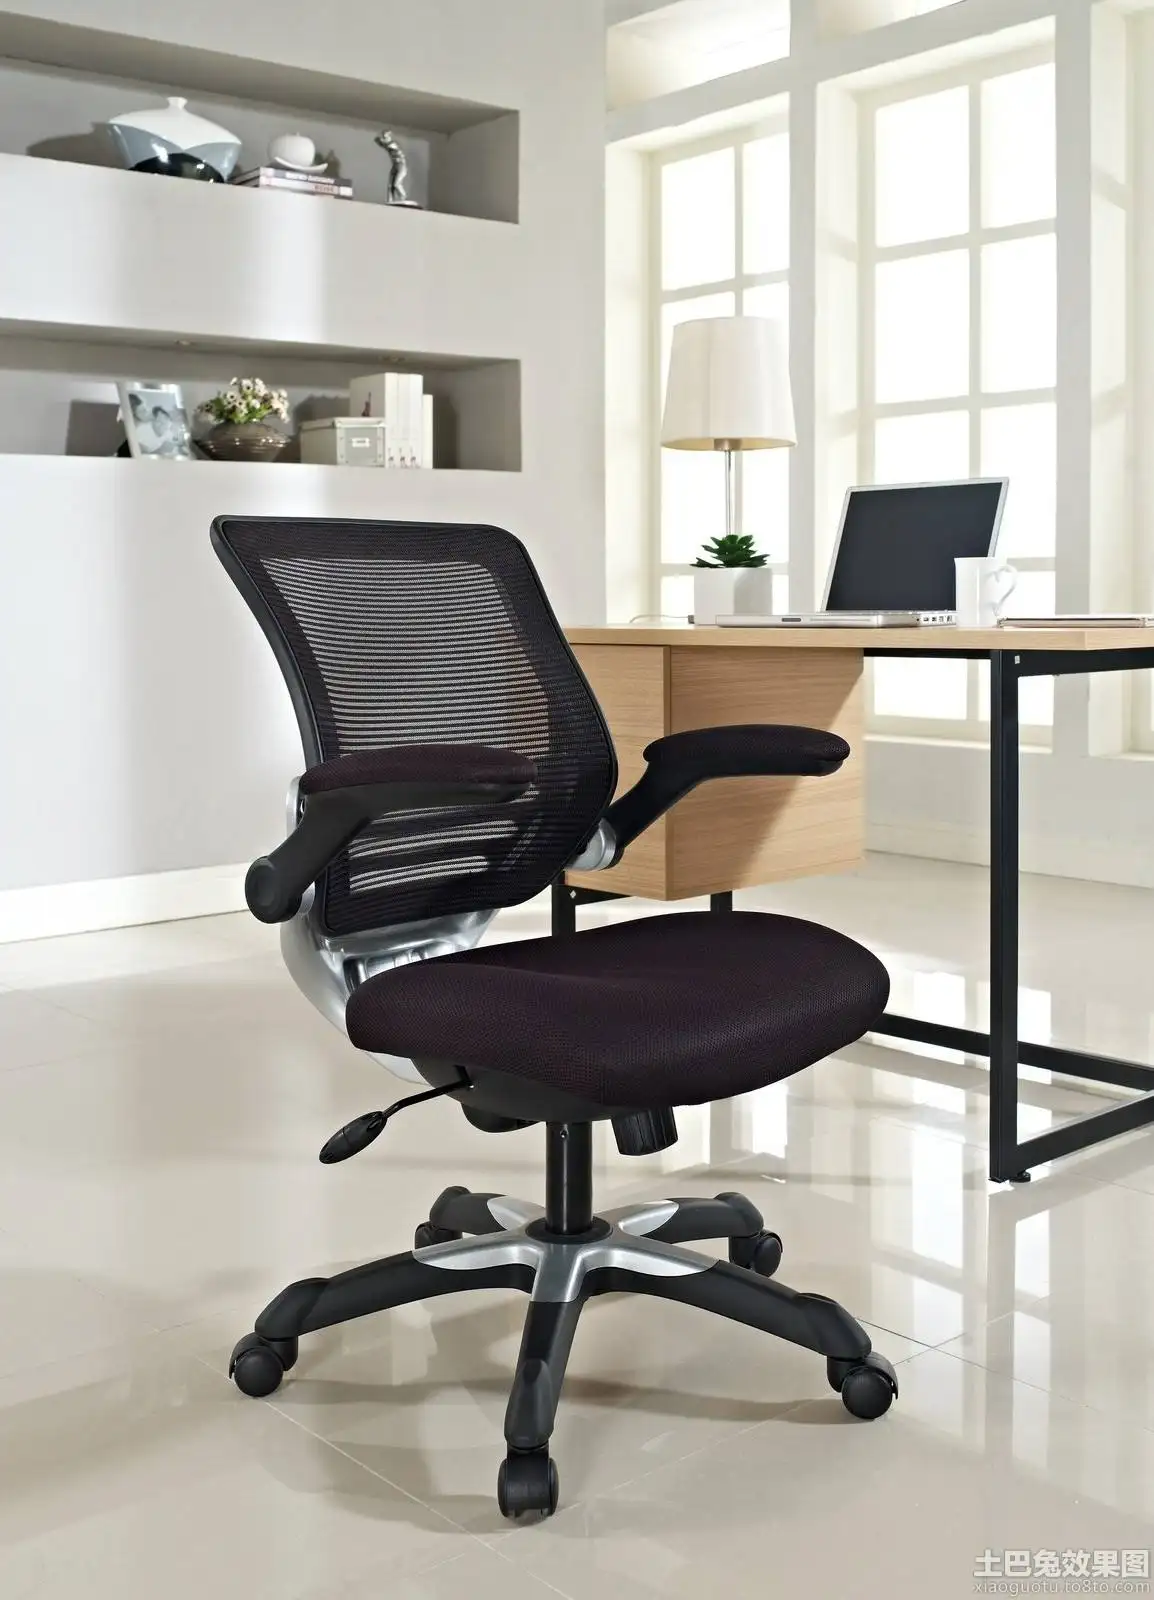 The construction and types of office chairs